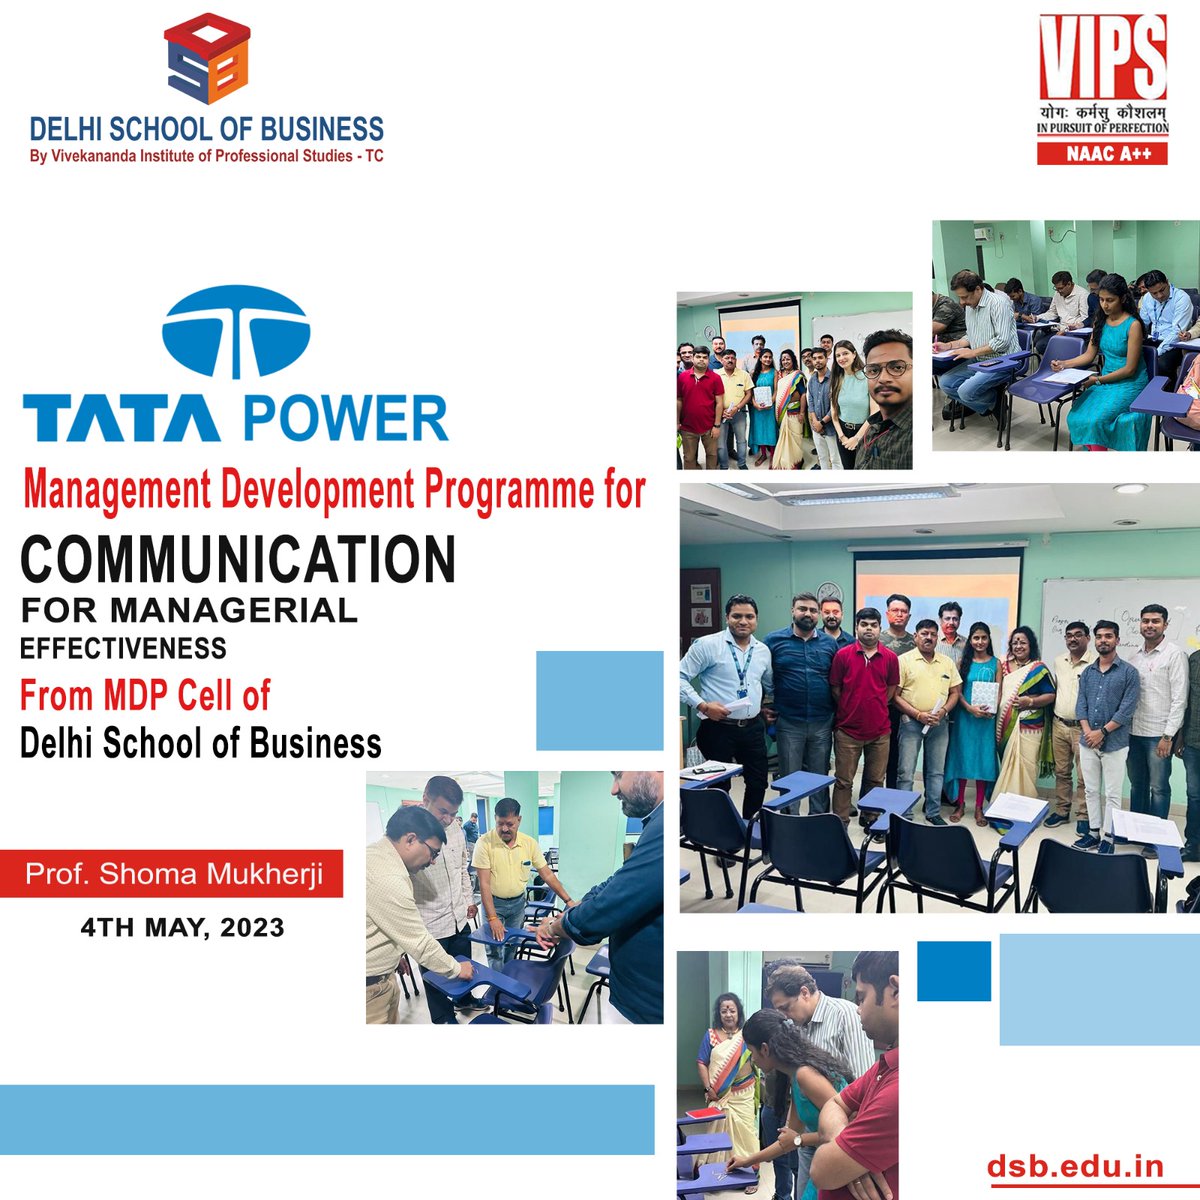 Prof. (Dr.) Shoma Mukherji shared insights on Communication for Managerial Effectiveness in a transformative MDP session for Tata Power officials on 4th May 2023.

#mdp #tata #management #dsbvips #pgdm #dsb #mba #mbaadmission #delhischoolofbusiness #leadershipskills #mbalife